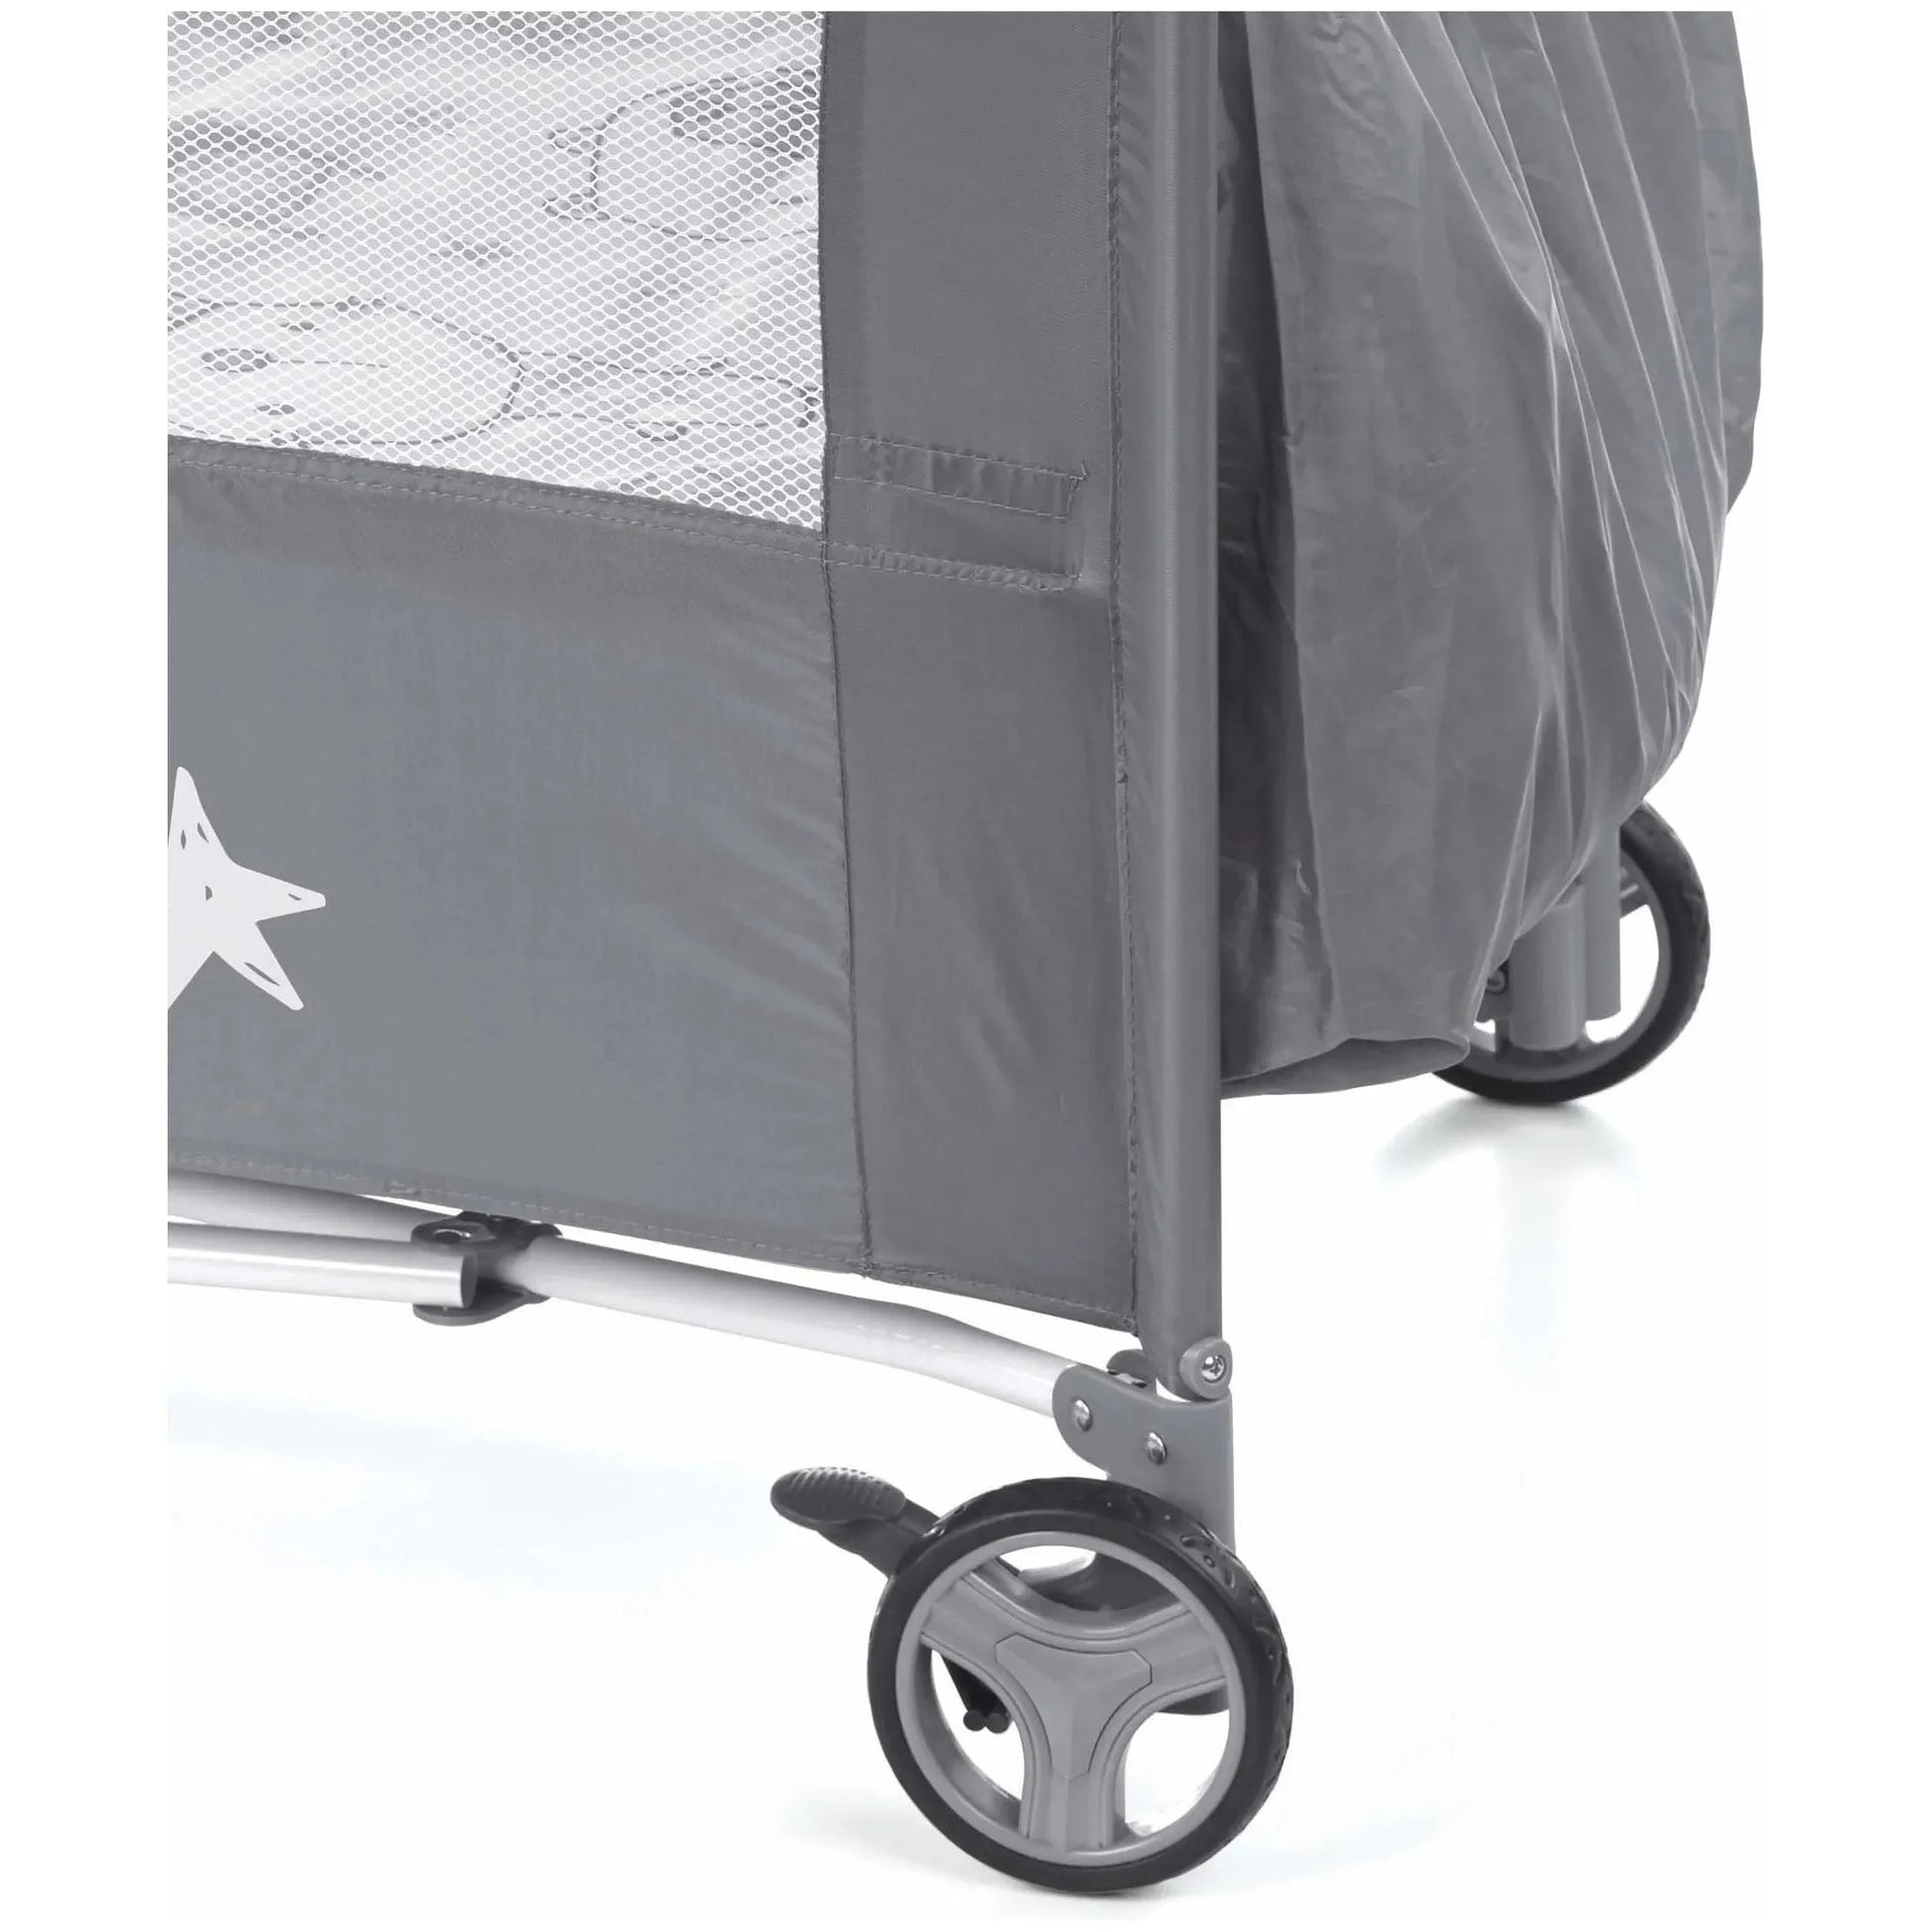 Jane Duo Level Travel Cot with Toybar